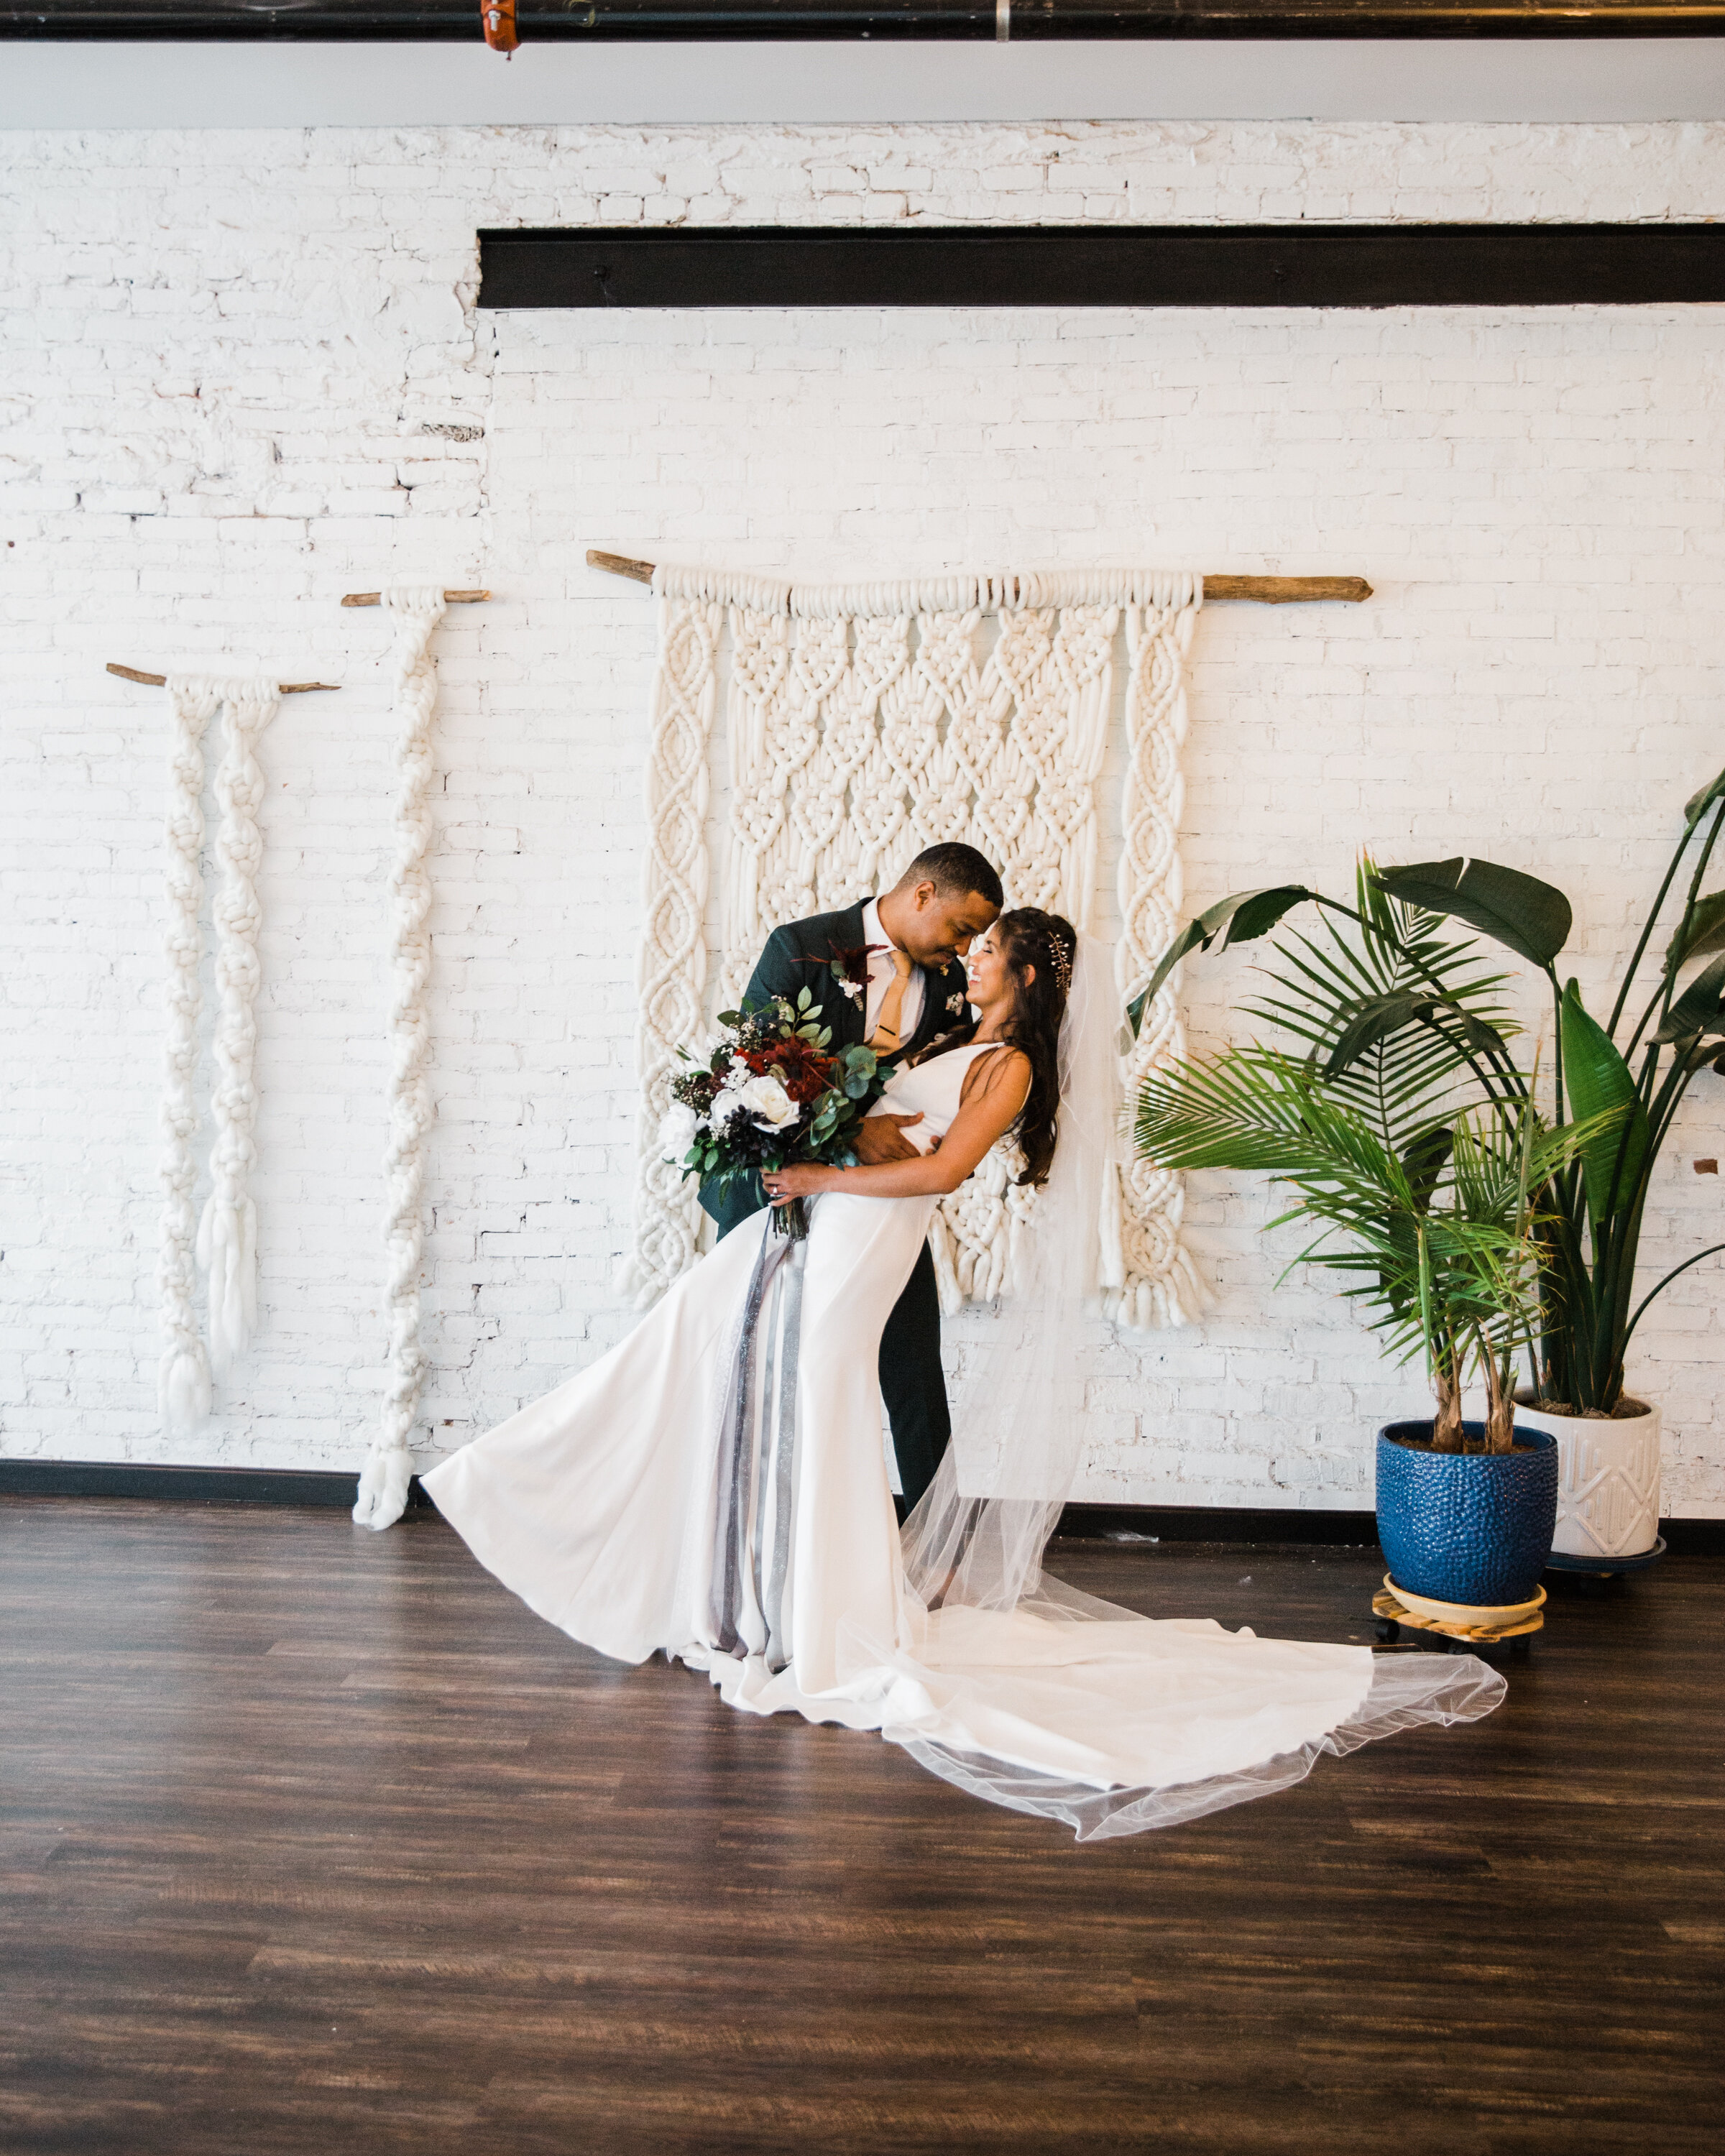 Ruby and Emerald Wedding at Habitat at Seya shot by Megapixels Media Top Wedding Photographers in Baltimore Maryland DCMulticultural Couple styled shoot (113 of 136).jpg